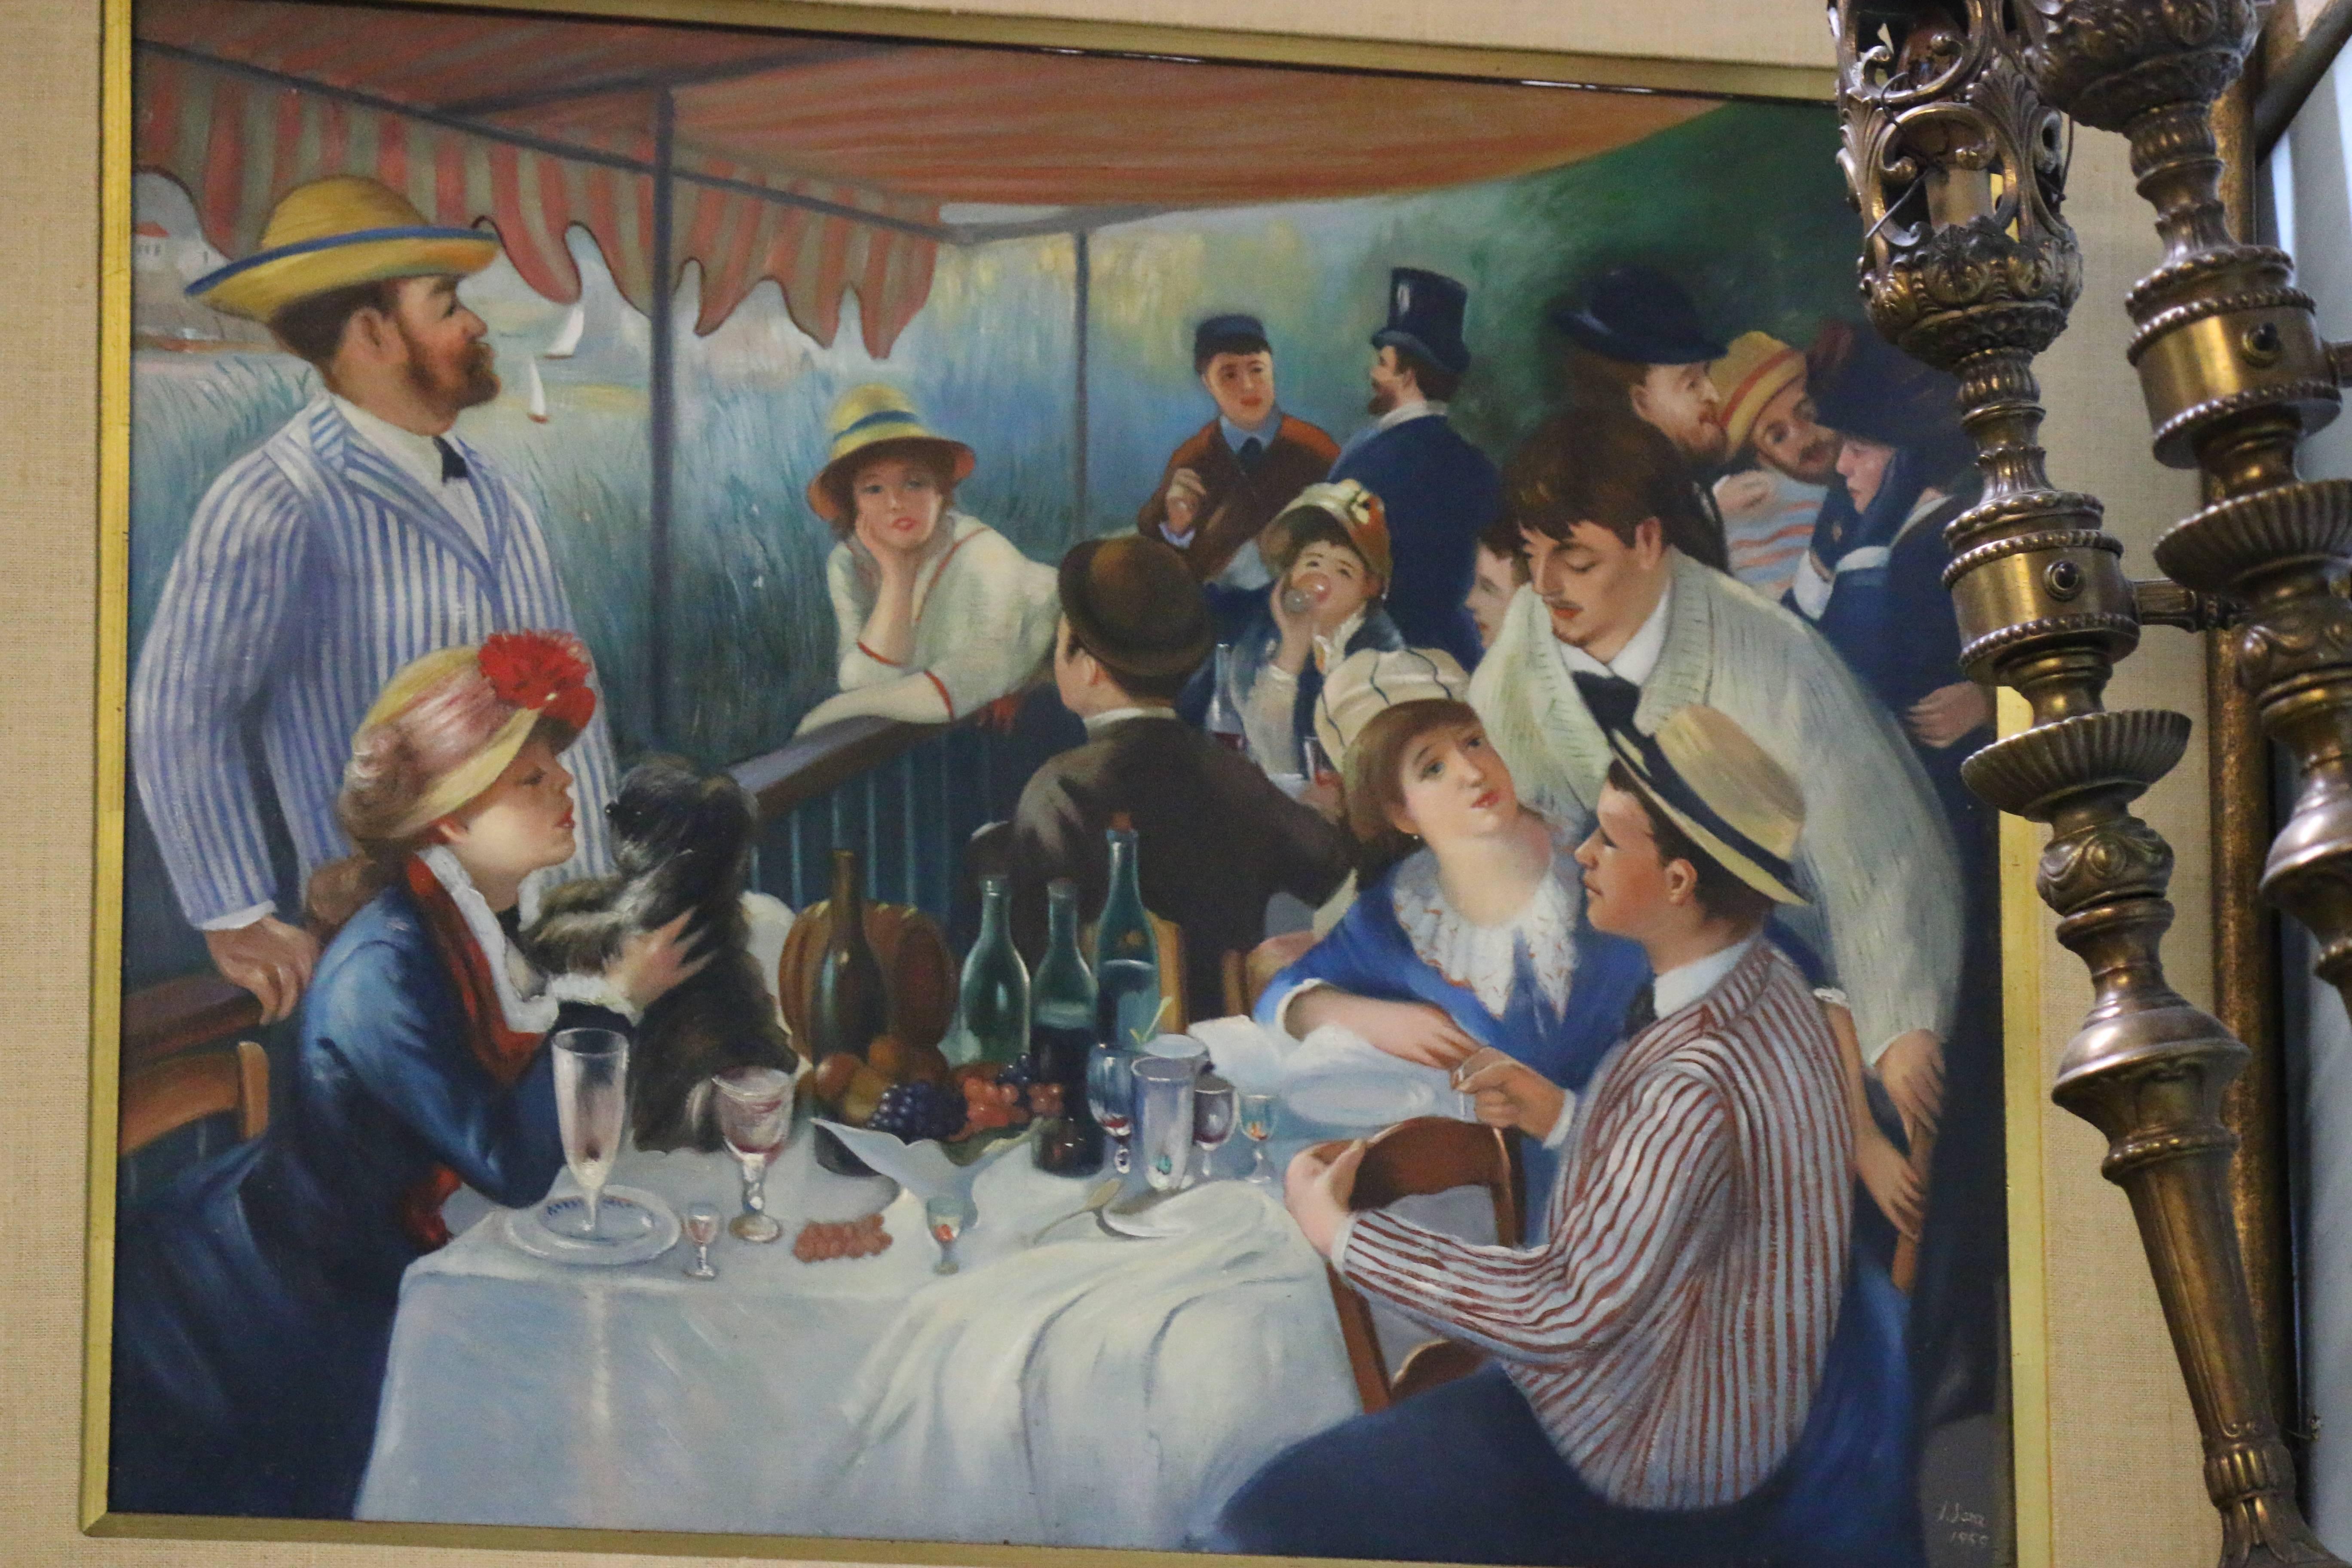 A Gorgeous after Renoir Impressionist 'Boating Party' Painting on Linen, painted by Spanish Artist J. Sanz (signed) in 1959. Sanz asserted his ownership (not a reproduction) of this image by changing the two front gentlemen's clothing from white